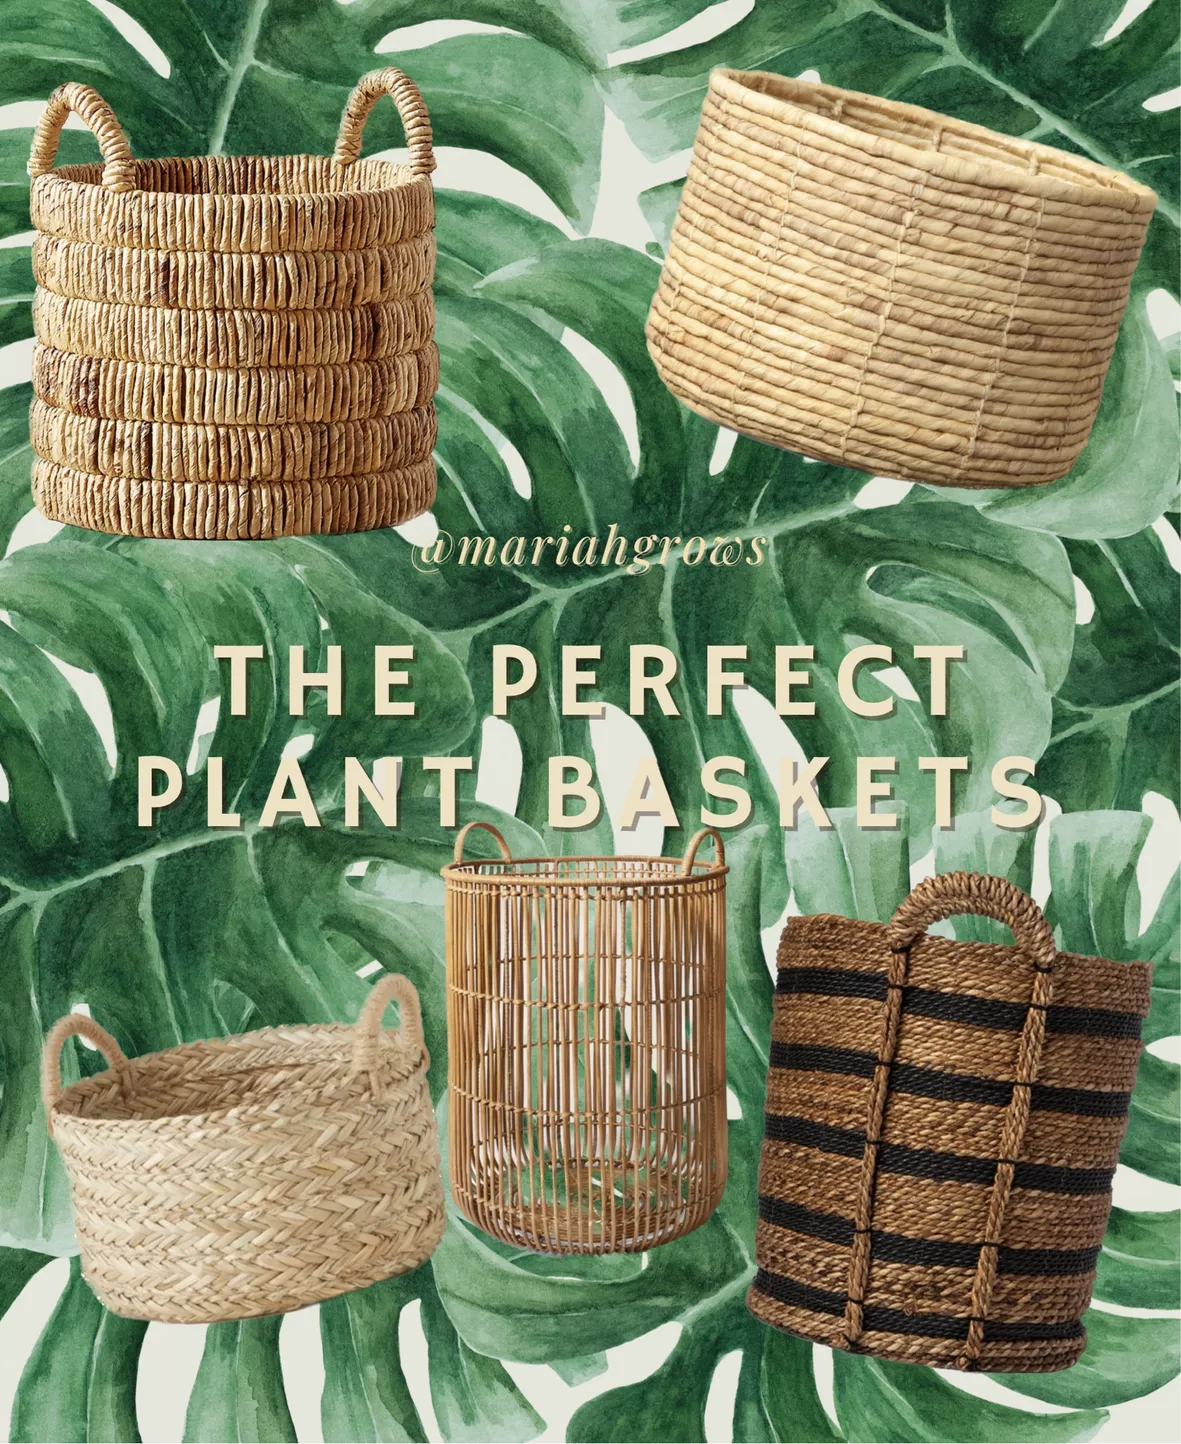 Plant Basket Small Seagrass Planter Baskets for Indoors, Woven Rattan Planters for Tall Indoor Plants with Handles, Wicker Boho Plant Pots